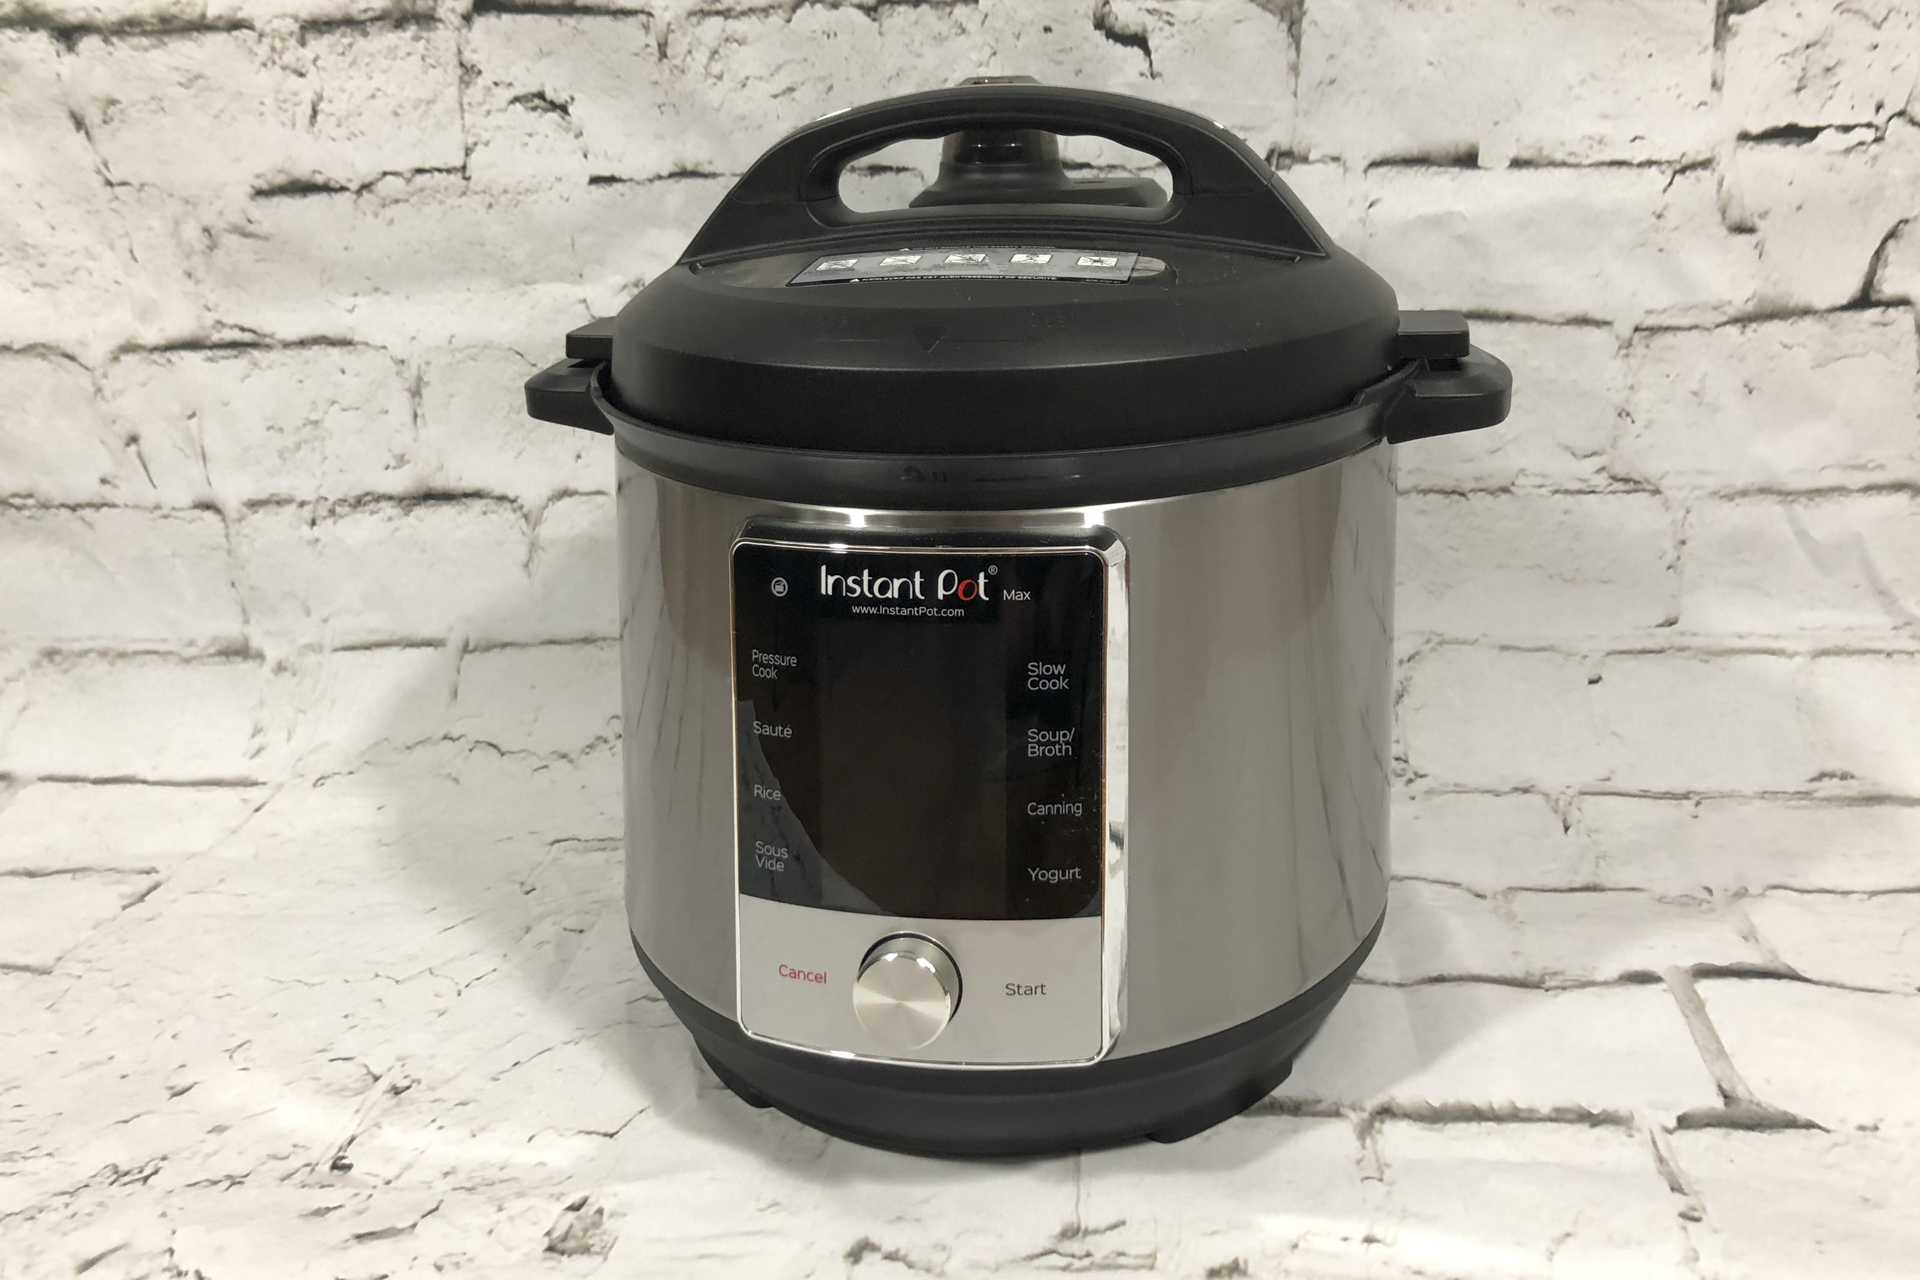 Use your Instant Pot's Sous Vide program! (available on some models)